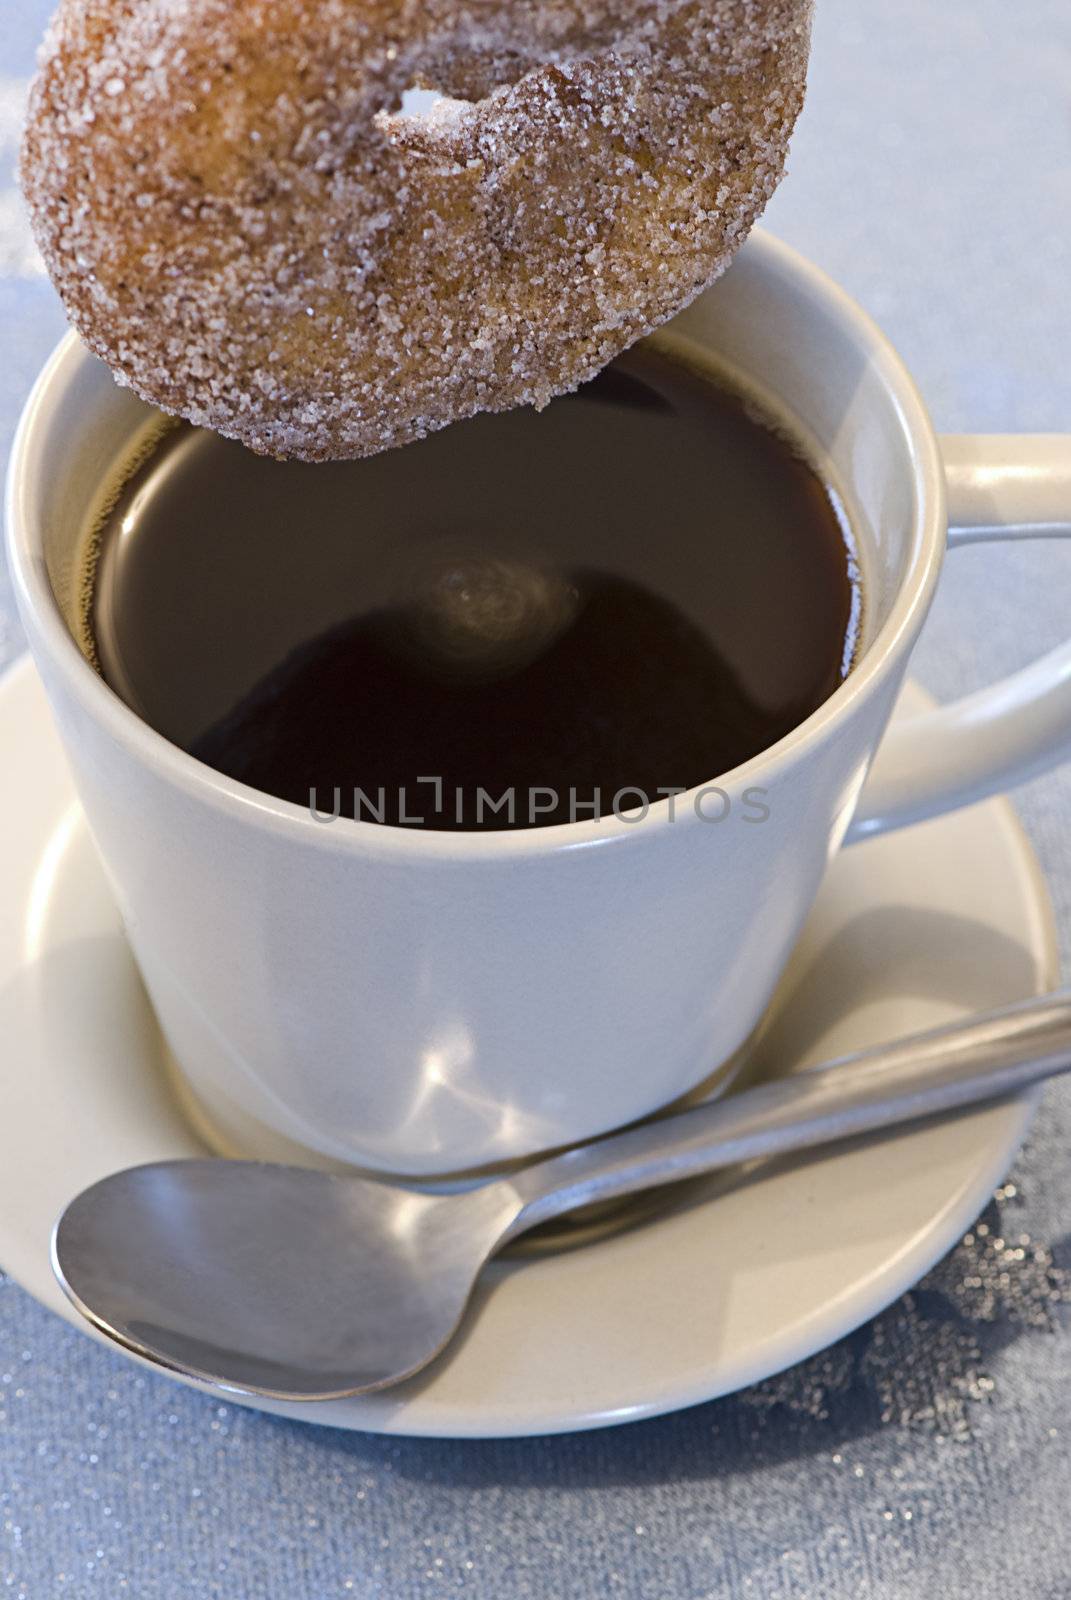 A cinnamon donut being dunked in a cup of coffee.